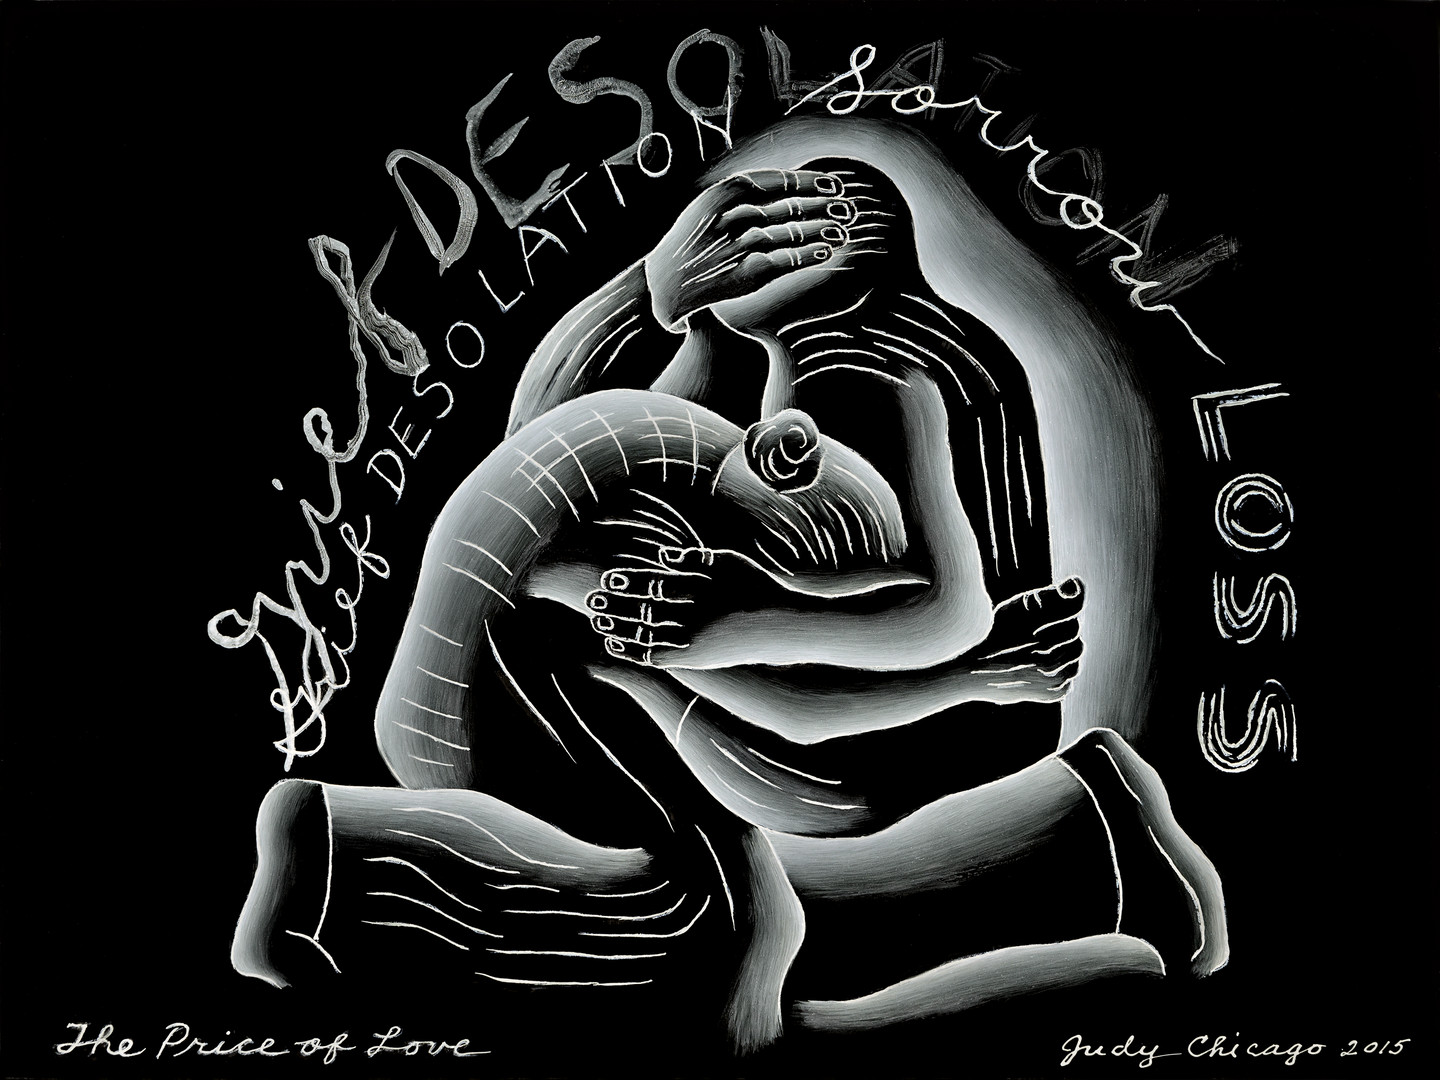 White painted image of two figures embracing on a black background. Handwritten text surrounds the figures states 